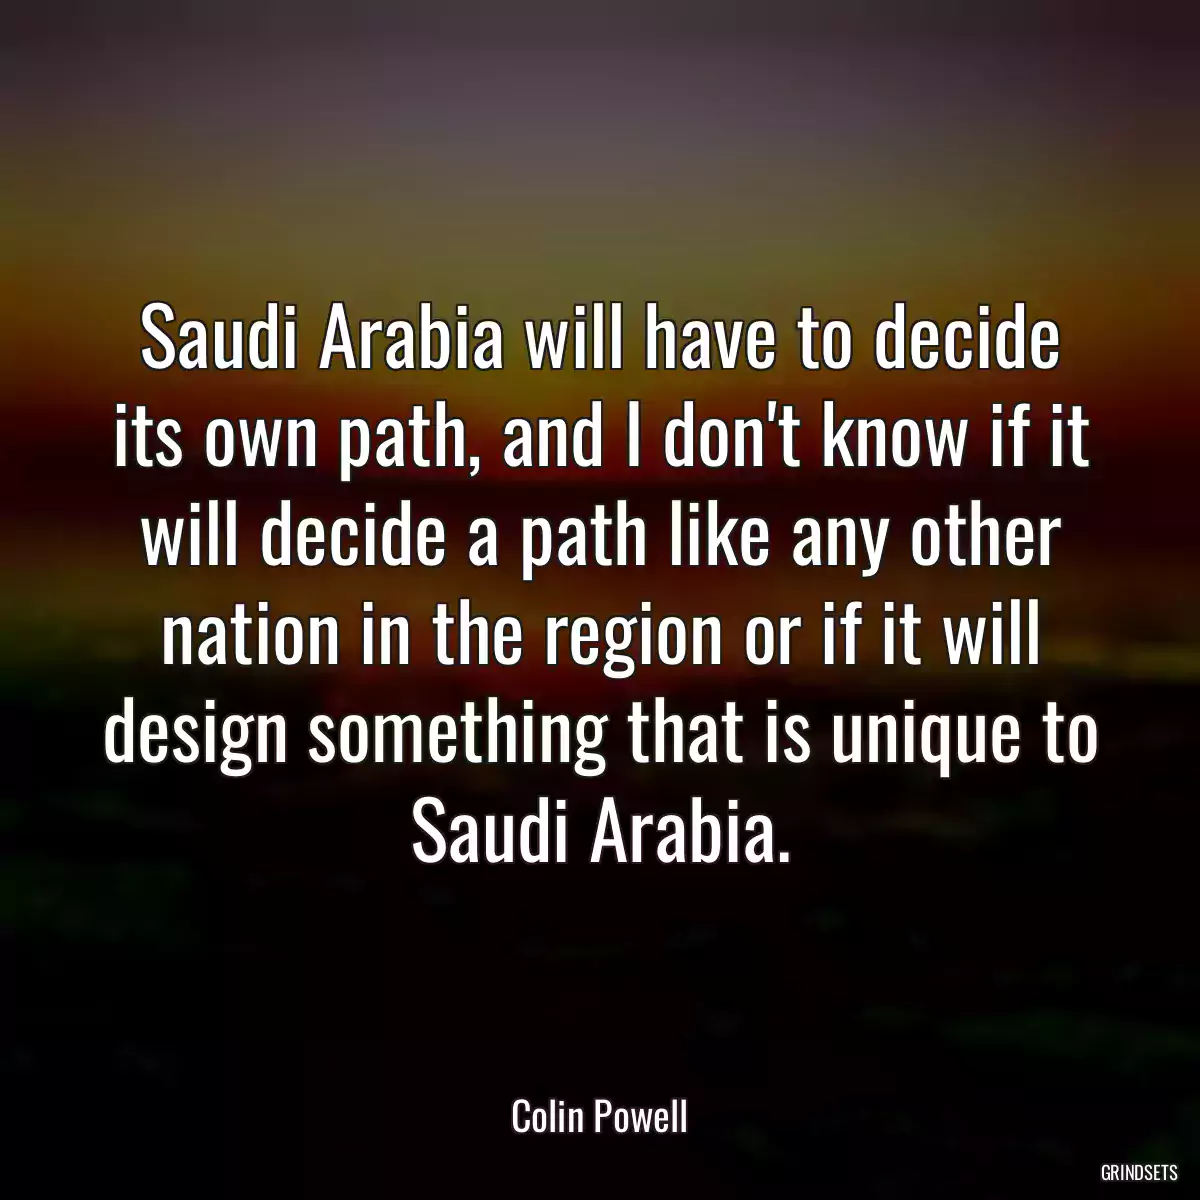 Saudi Arabia will have to decide its own path, and I don\'t know if it will decide a path like any other nation in the region or if it will design something that is unique to Saudi Arabia.